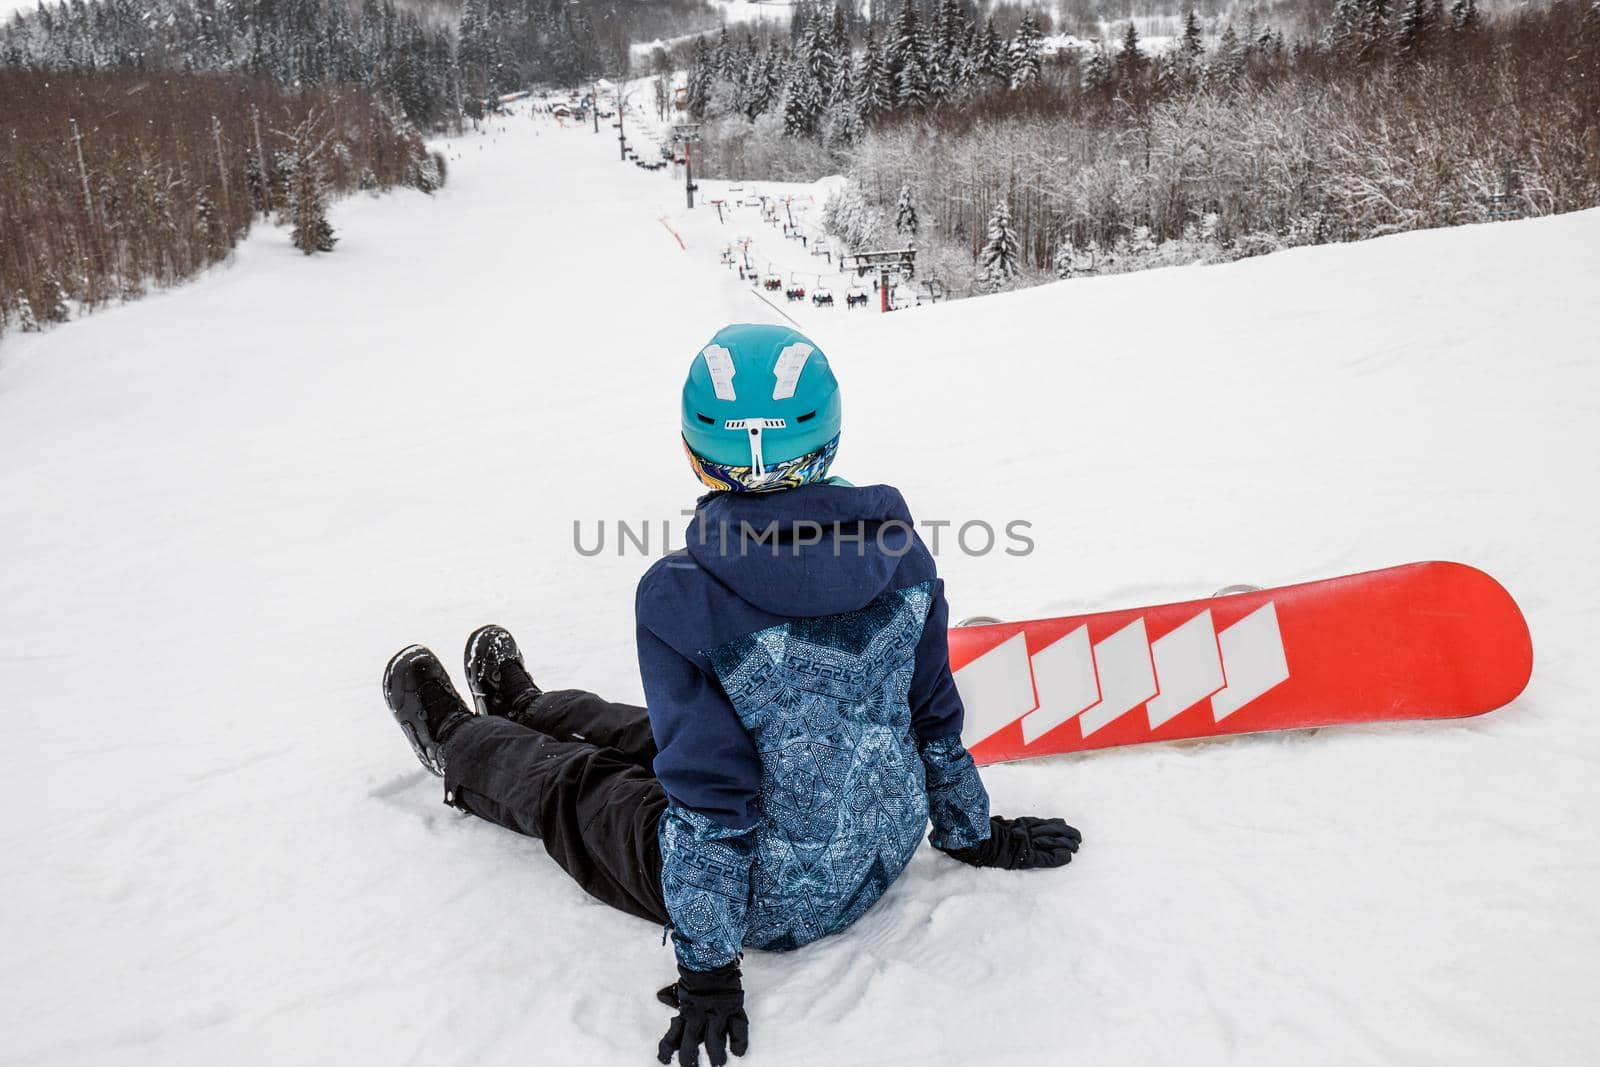 Female in a blue suit sitting with a snowboard on a large snow slope. Snowboarder looks at a beautiful view of the snowy forest. Skiing holidays. Logoisk, Belarus